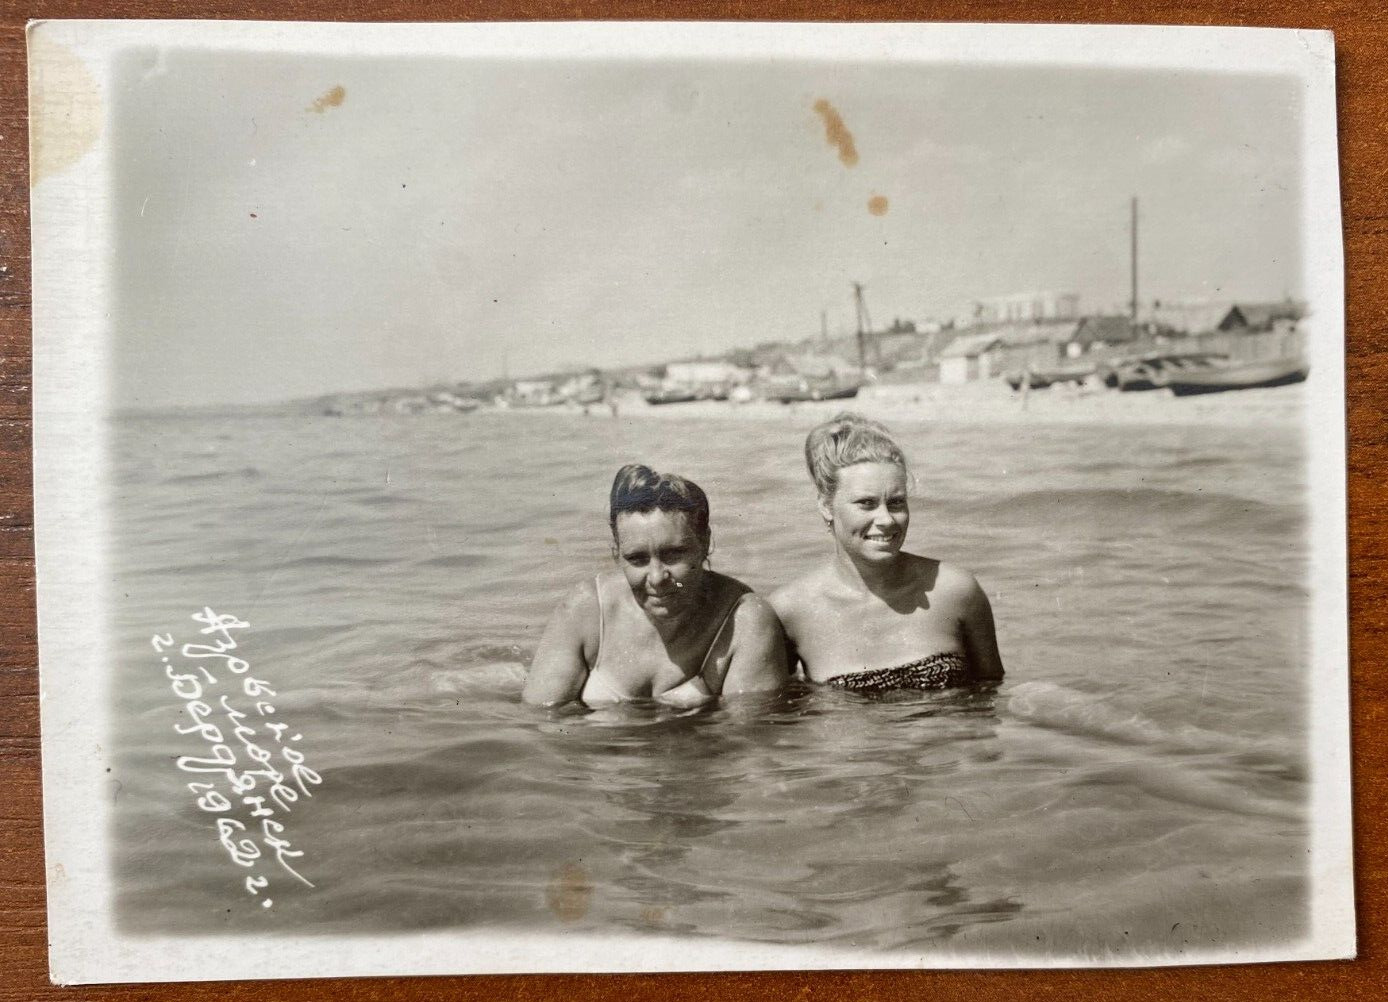 Affectionate gentle girls in swimsuits on the beach posing, Vintage photo